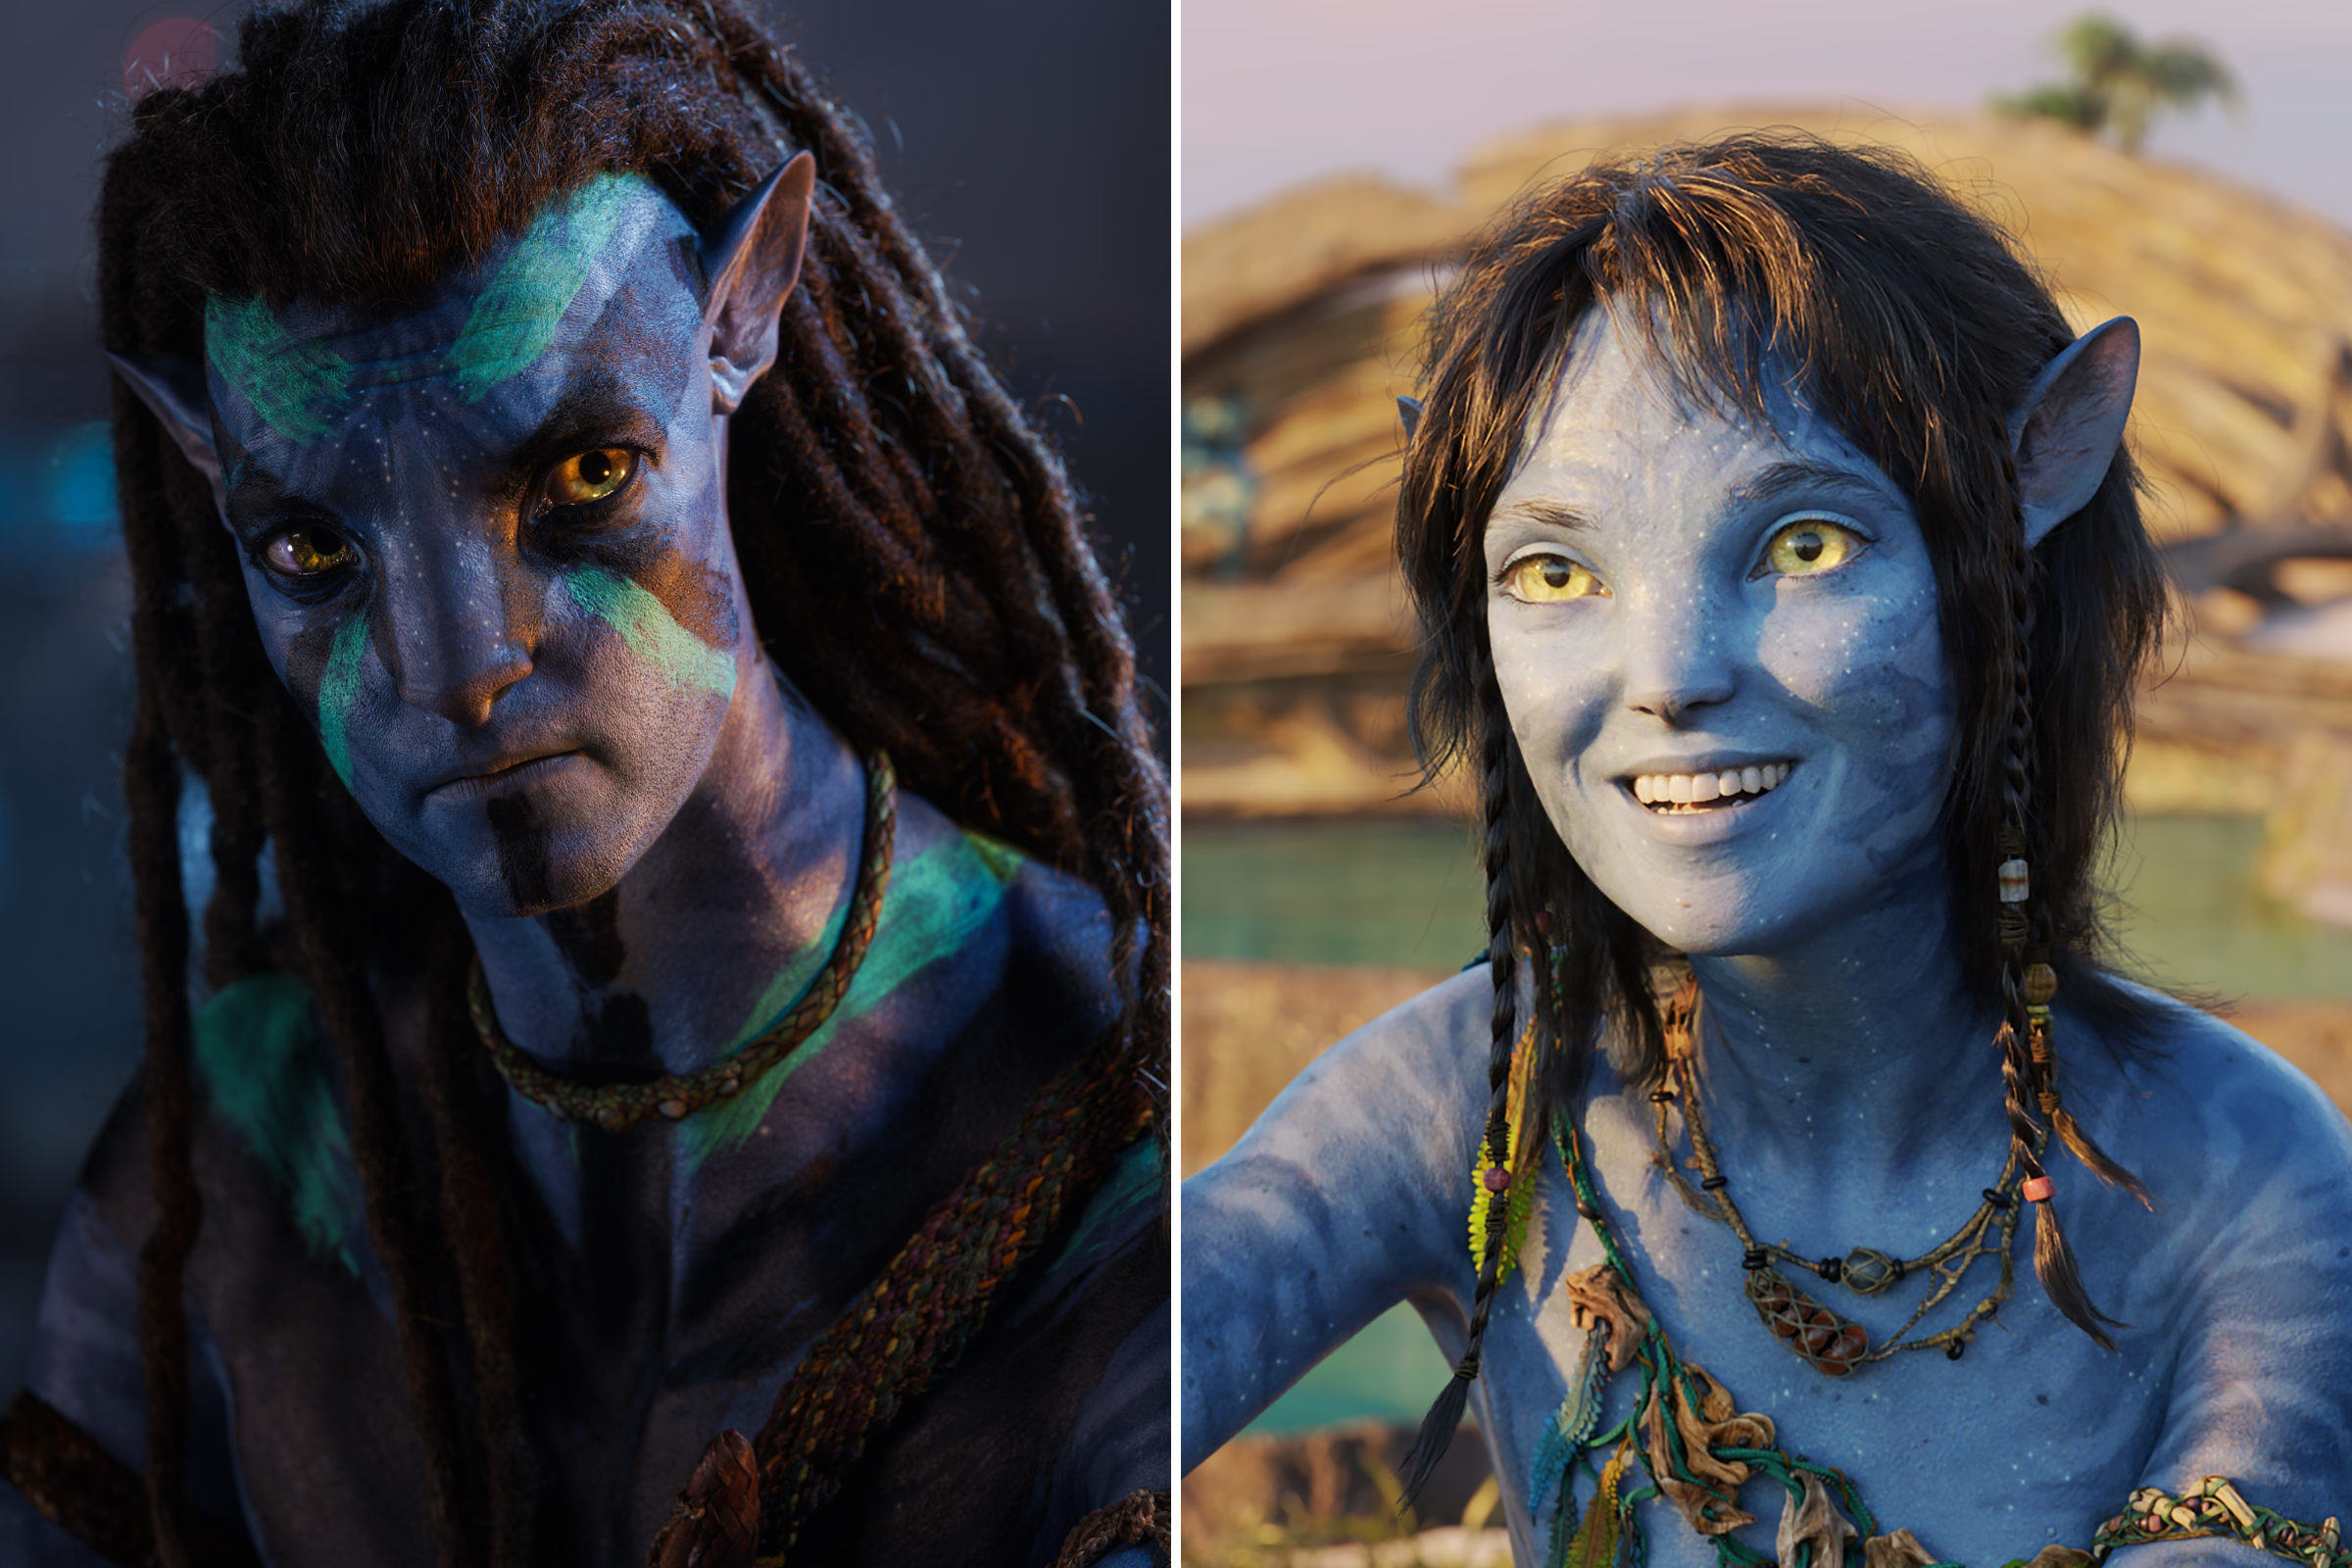 Meet the Avatar 2 cast from Kate Winslet to Sam Worthington